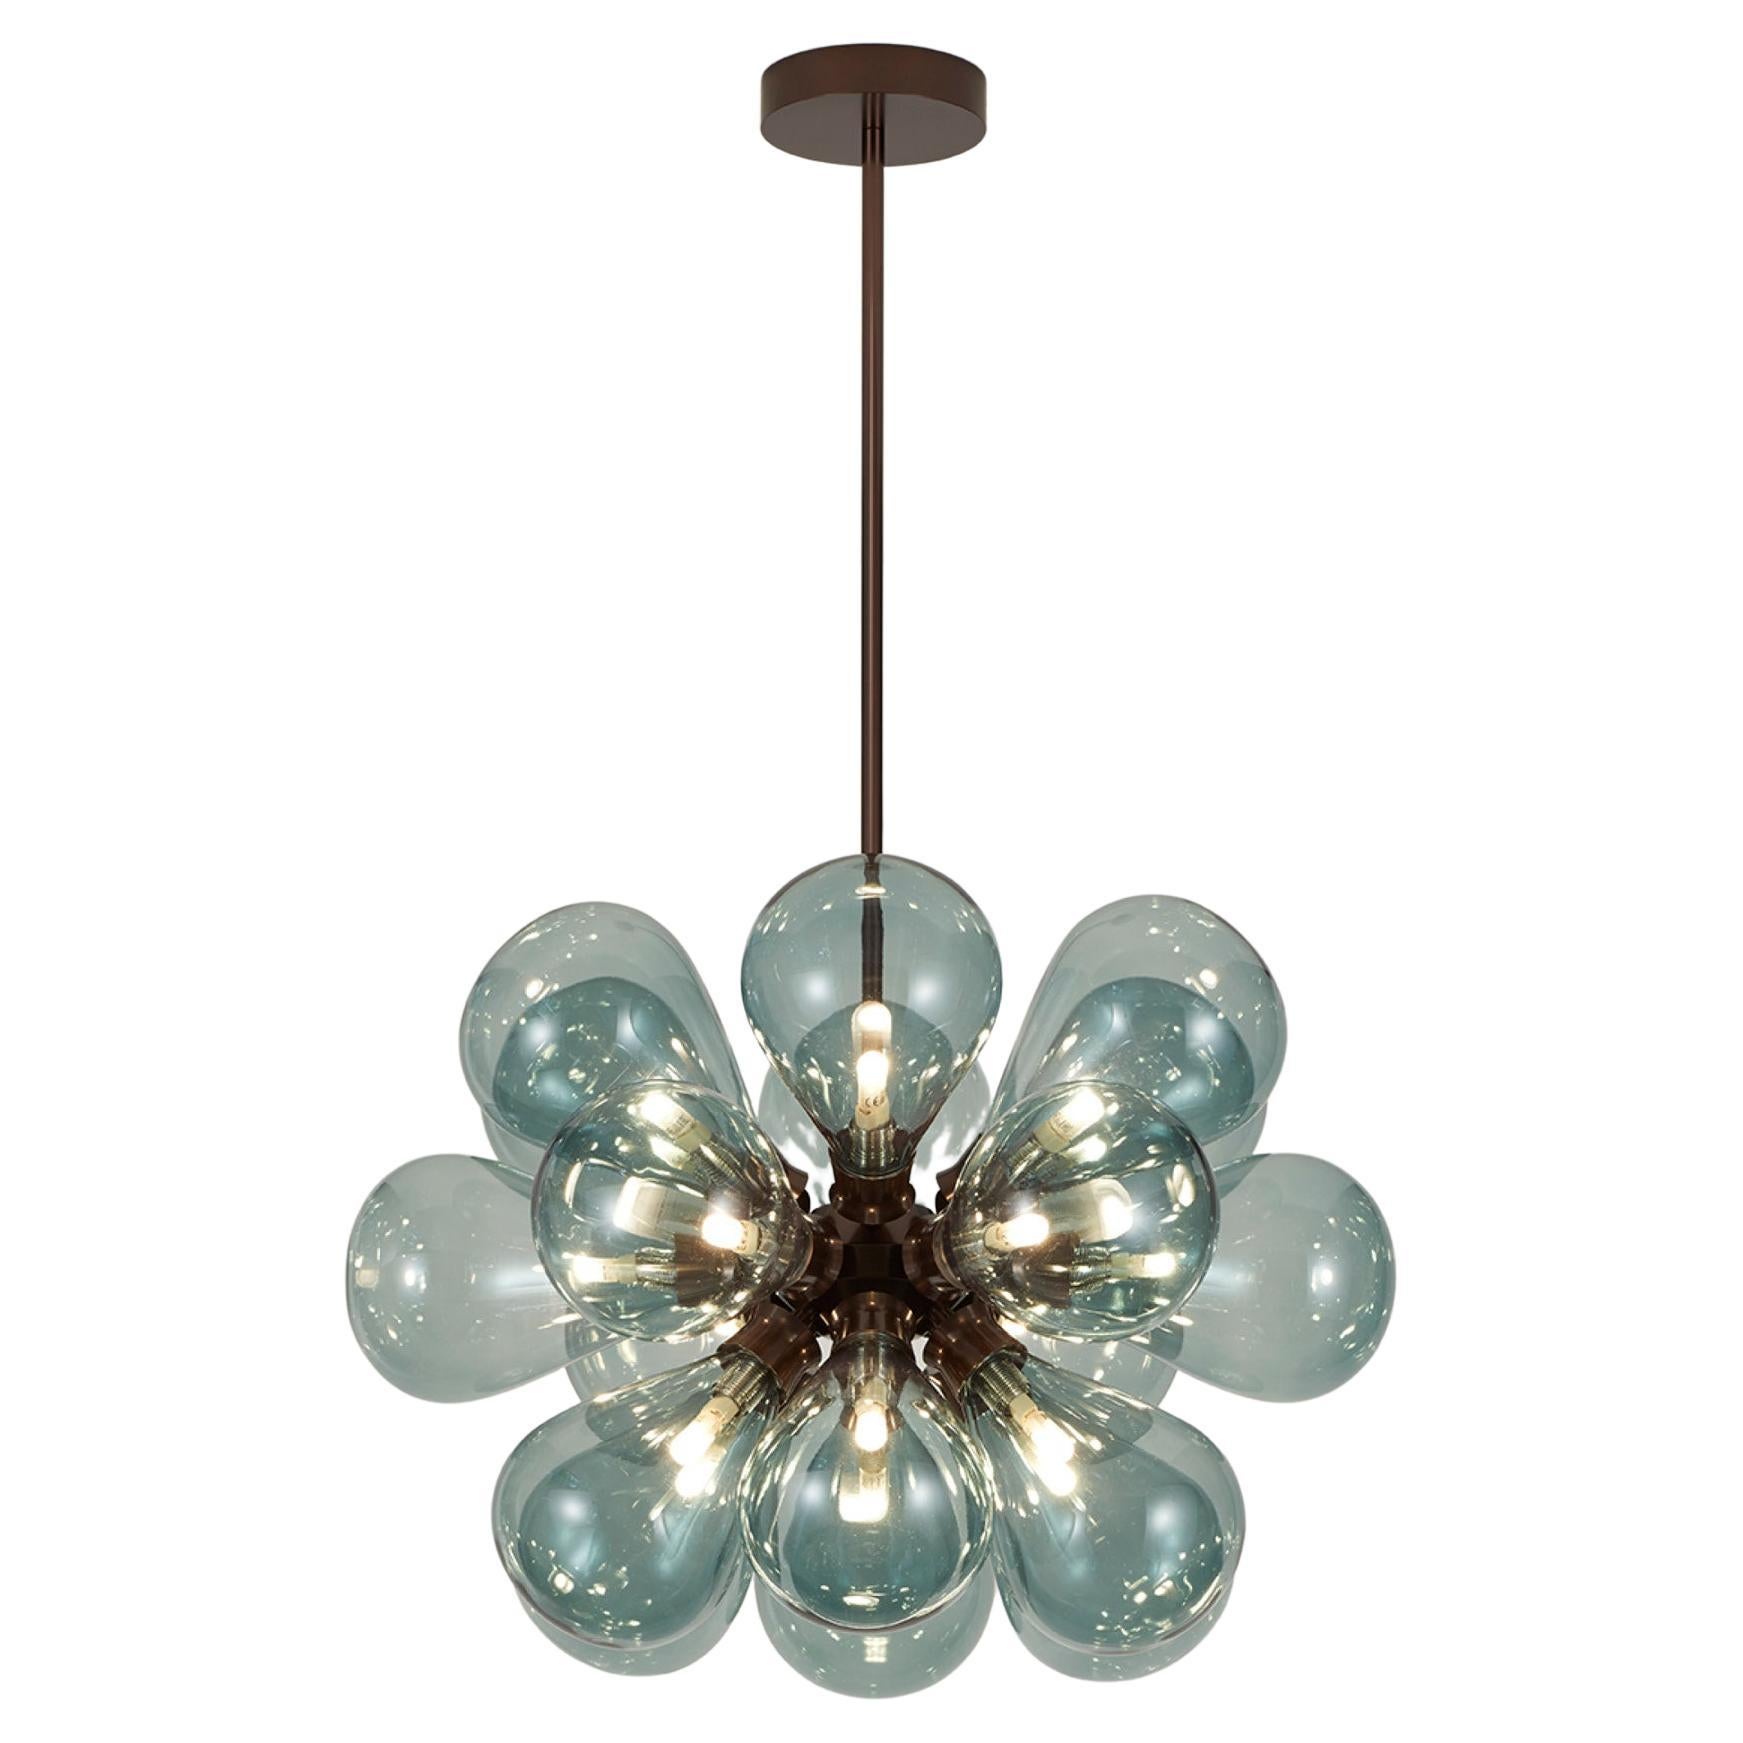 Cintola Maxi Pendant in Satin Bronze with 18 Handblown Smoke Grey Glass Globes For Sale